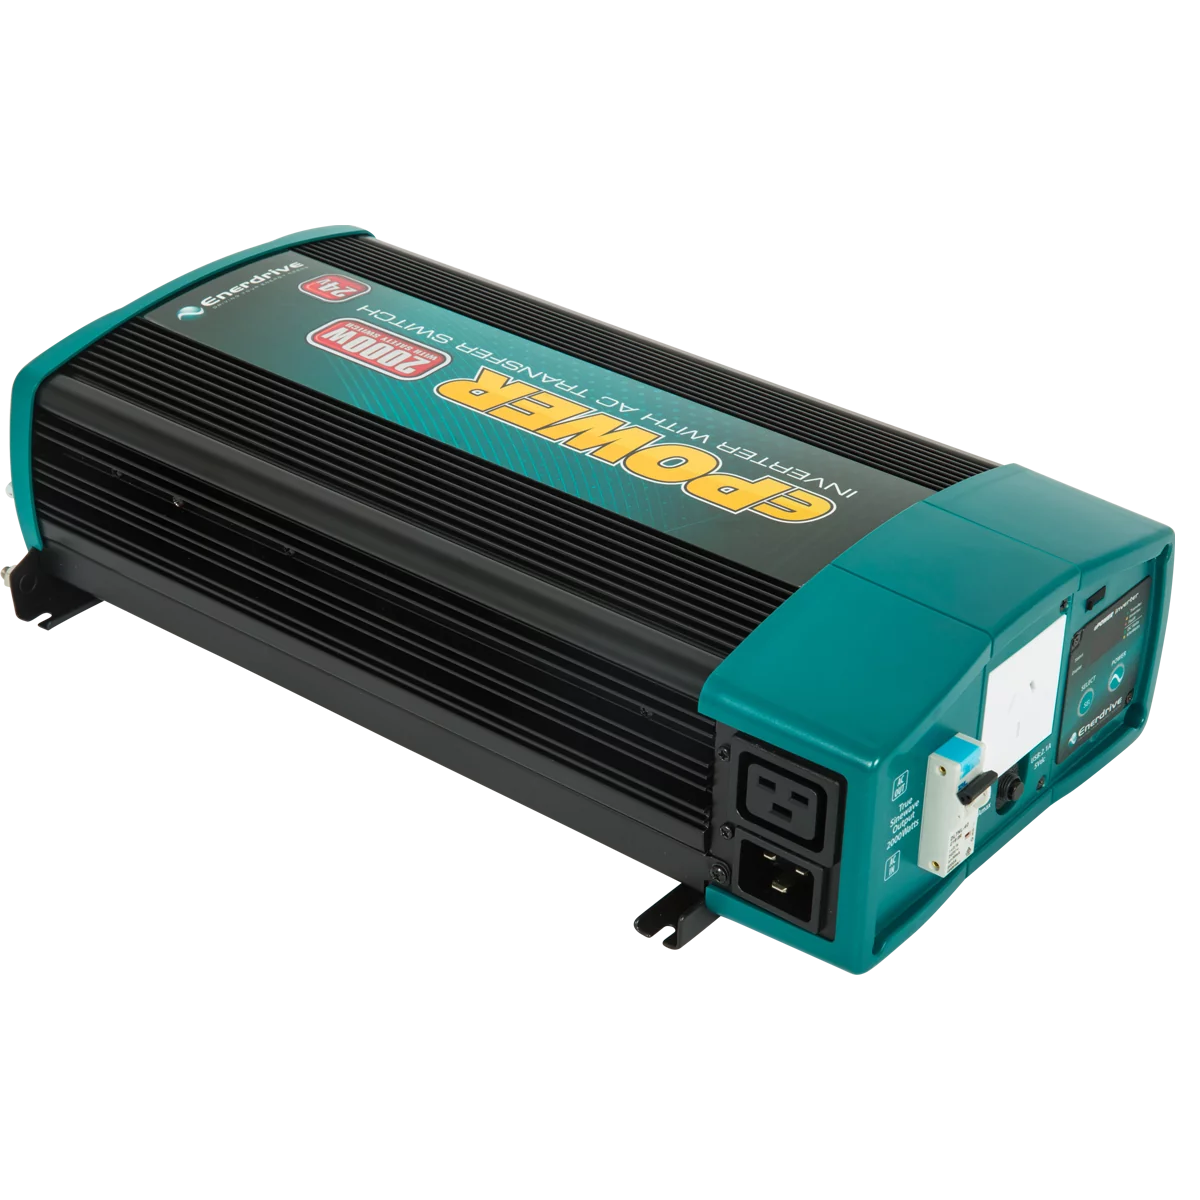 Enerdrive ePOWER 24V to 240V 2000W Pure Sine Wave Inverter with